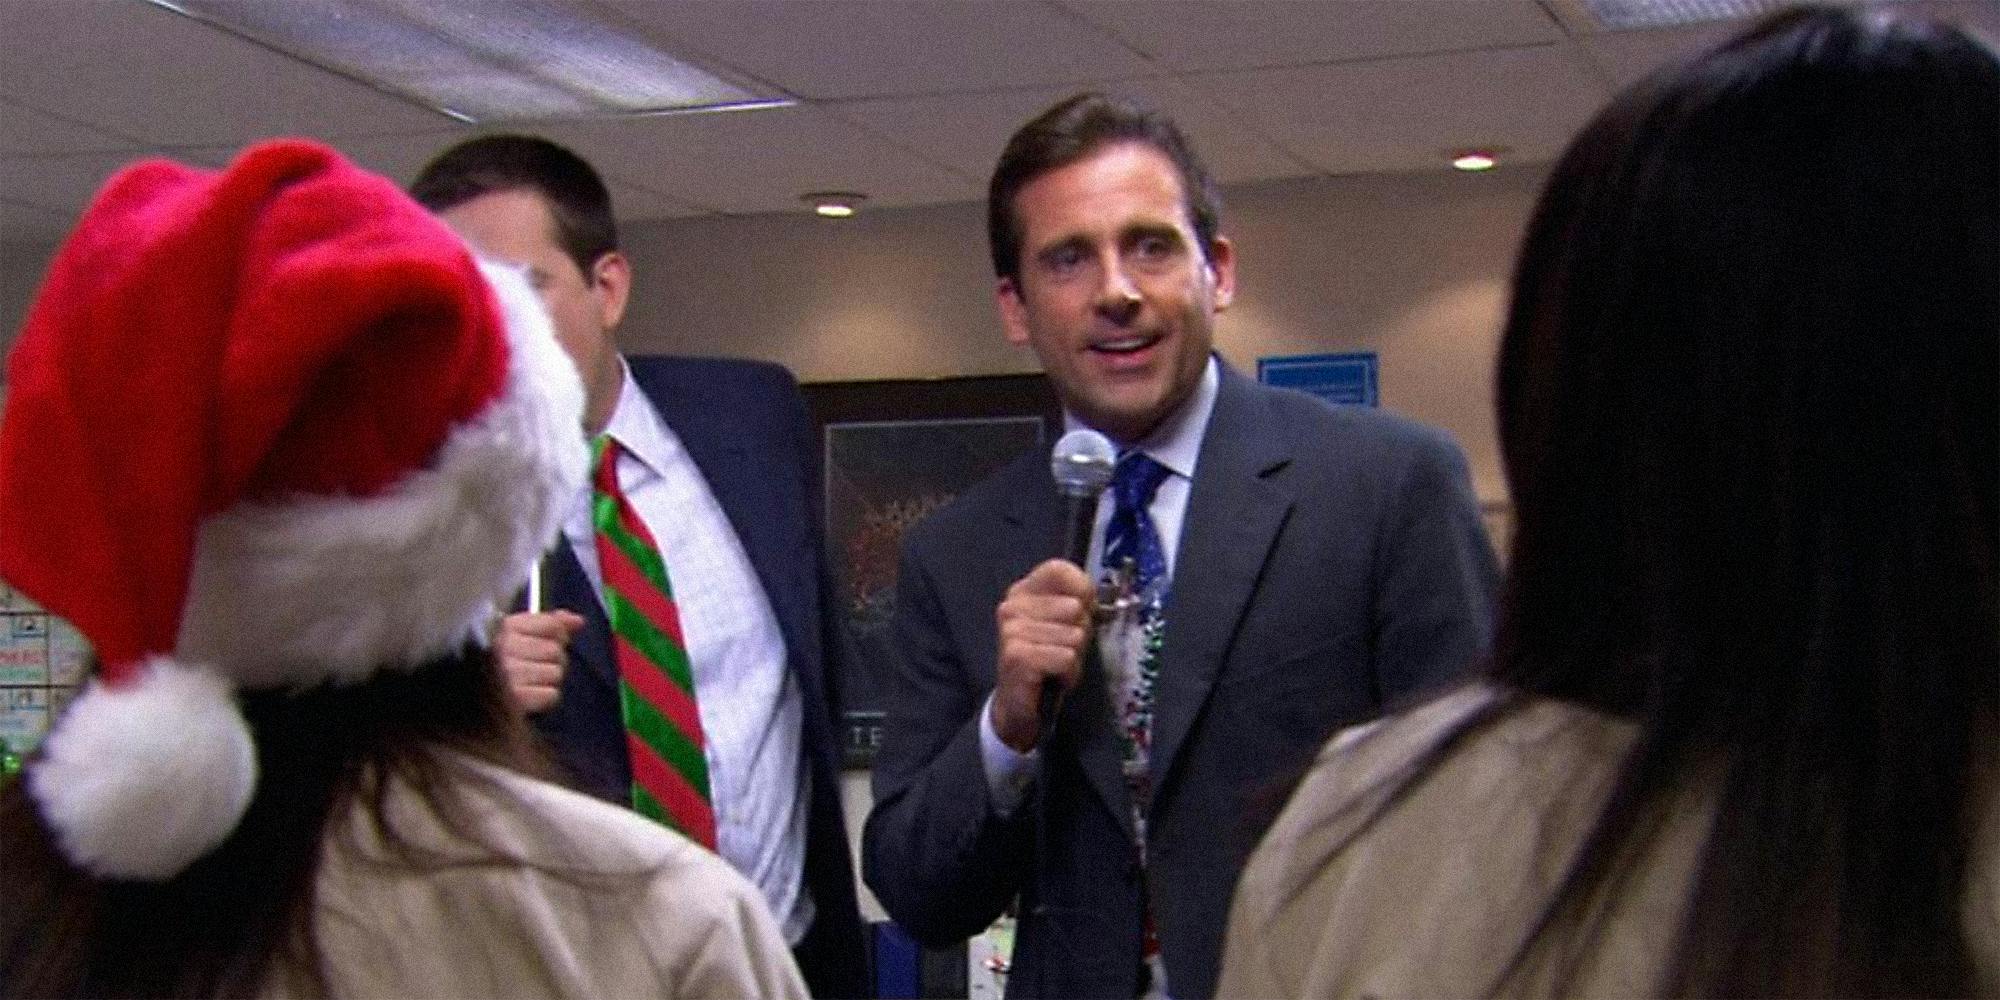 Michael Scott (played by Steve Carell) singing into a microphone.